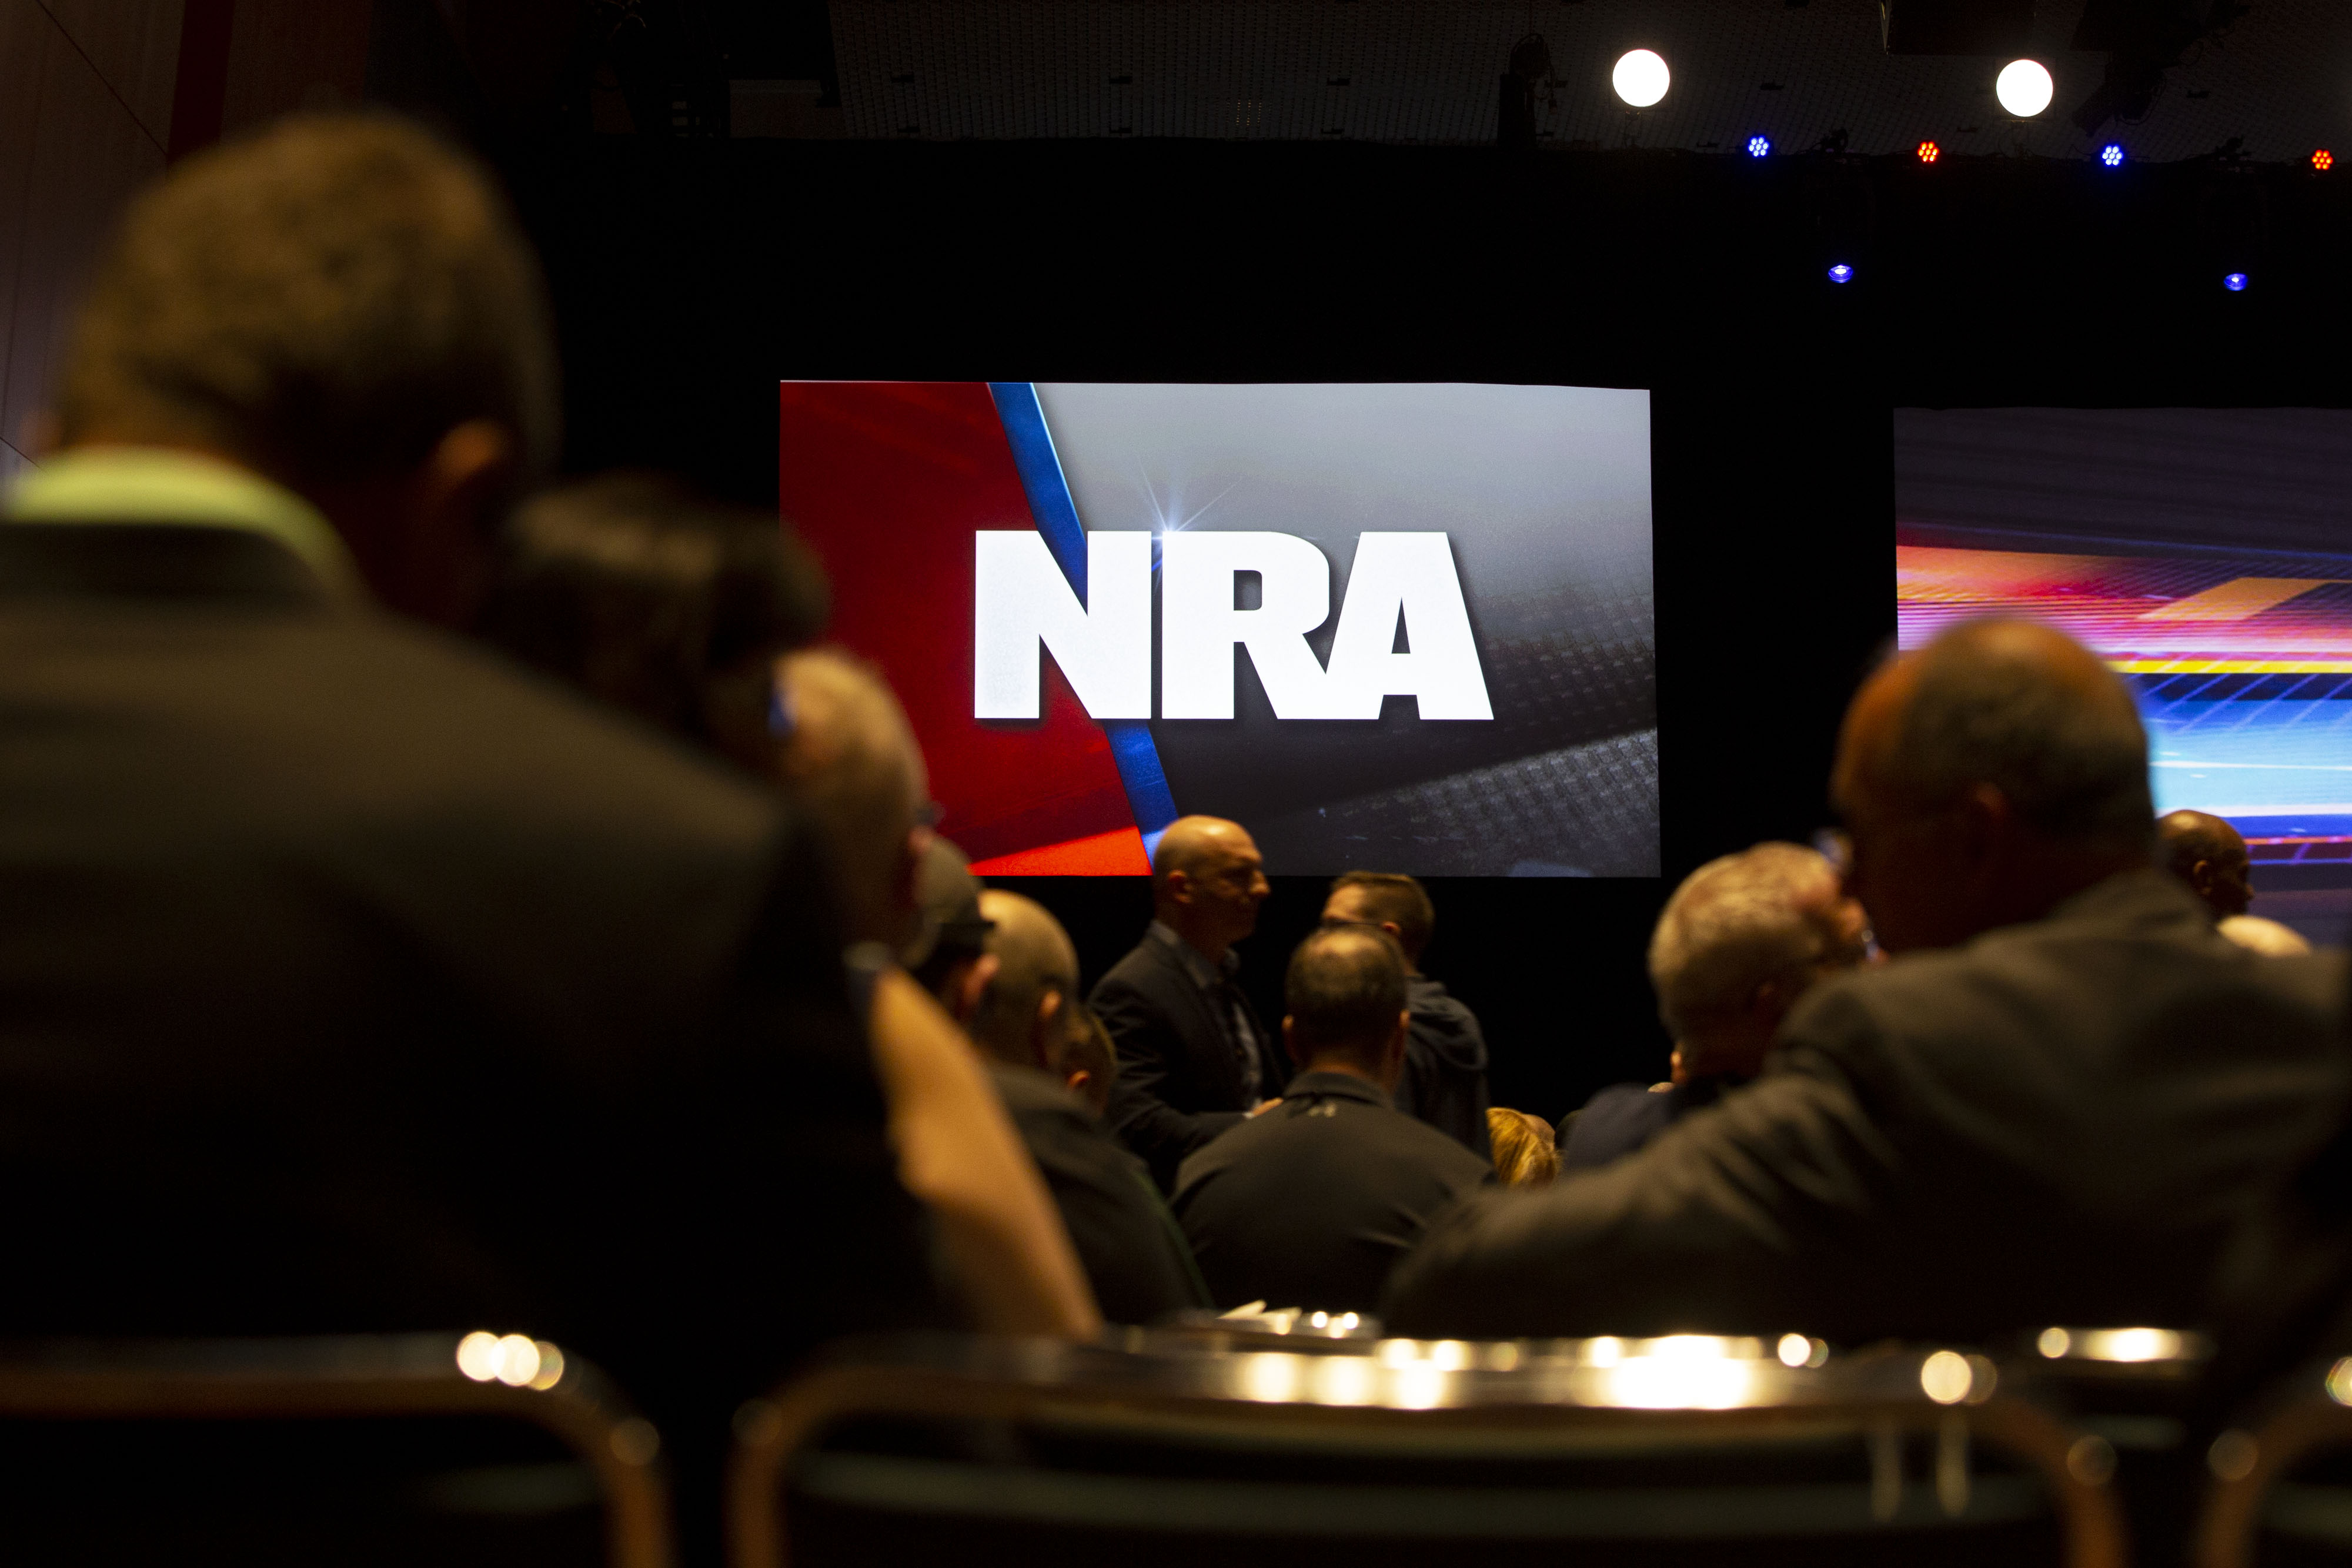 Even After Texas School Shooting, Diminished NRA Draws Trump, Cruz to